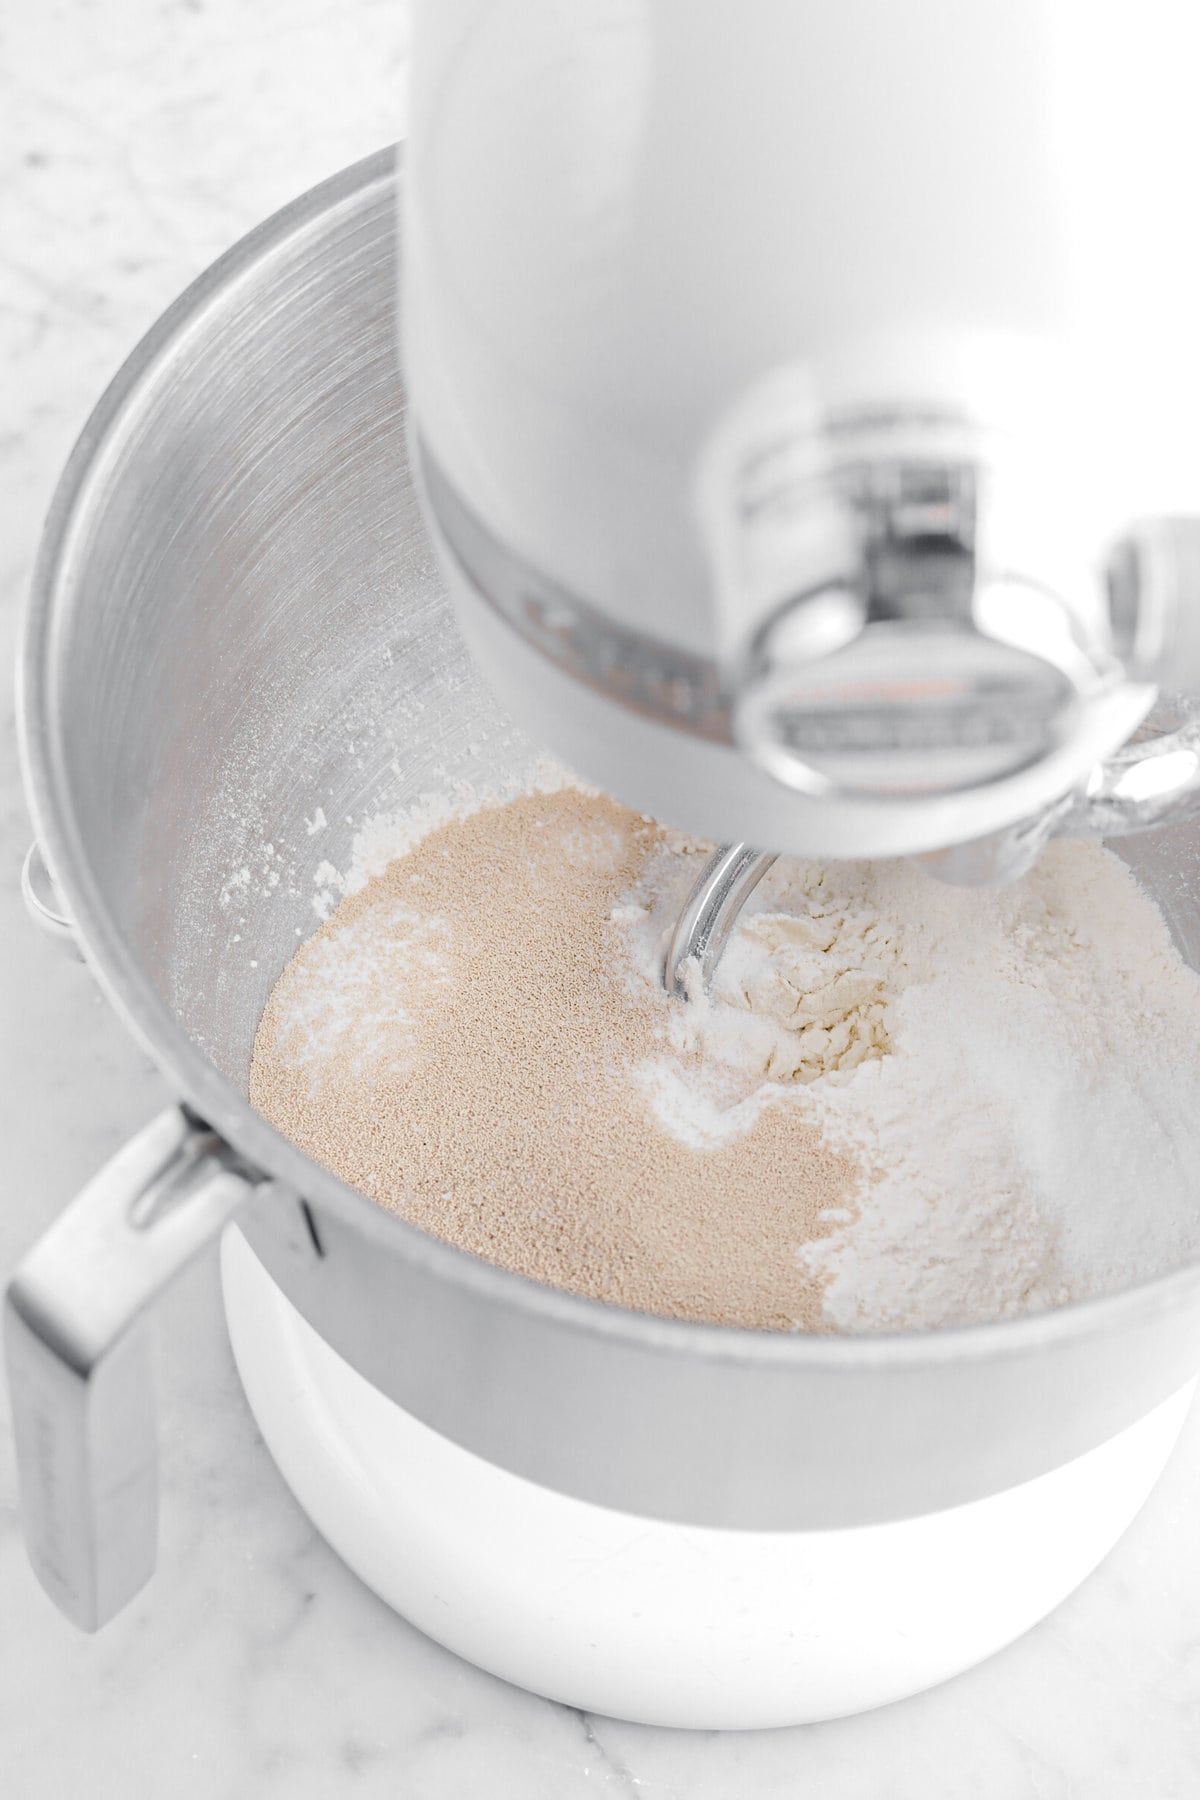 yeast, salt, flour, and sugar in stand mixer.